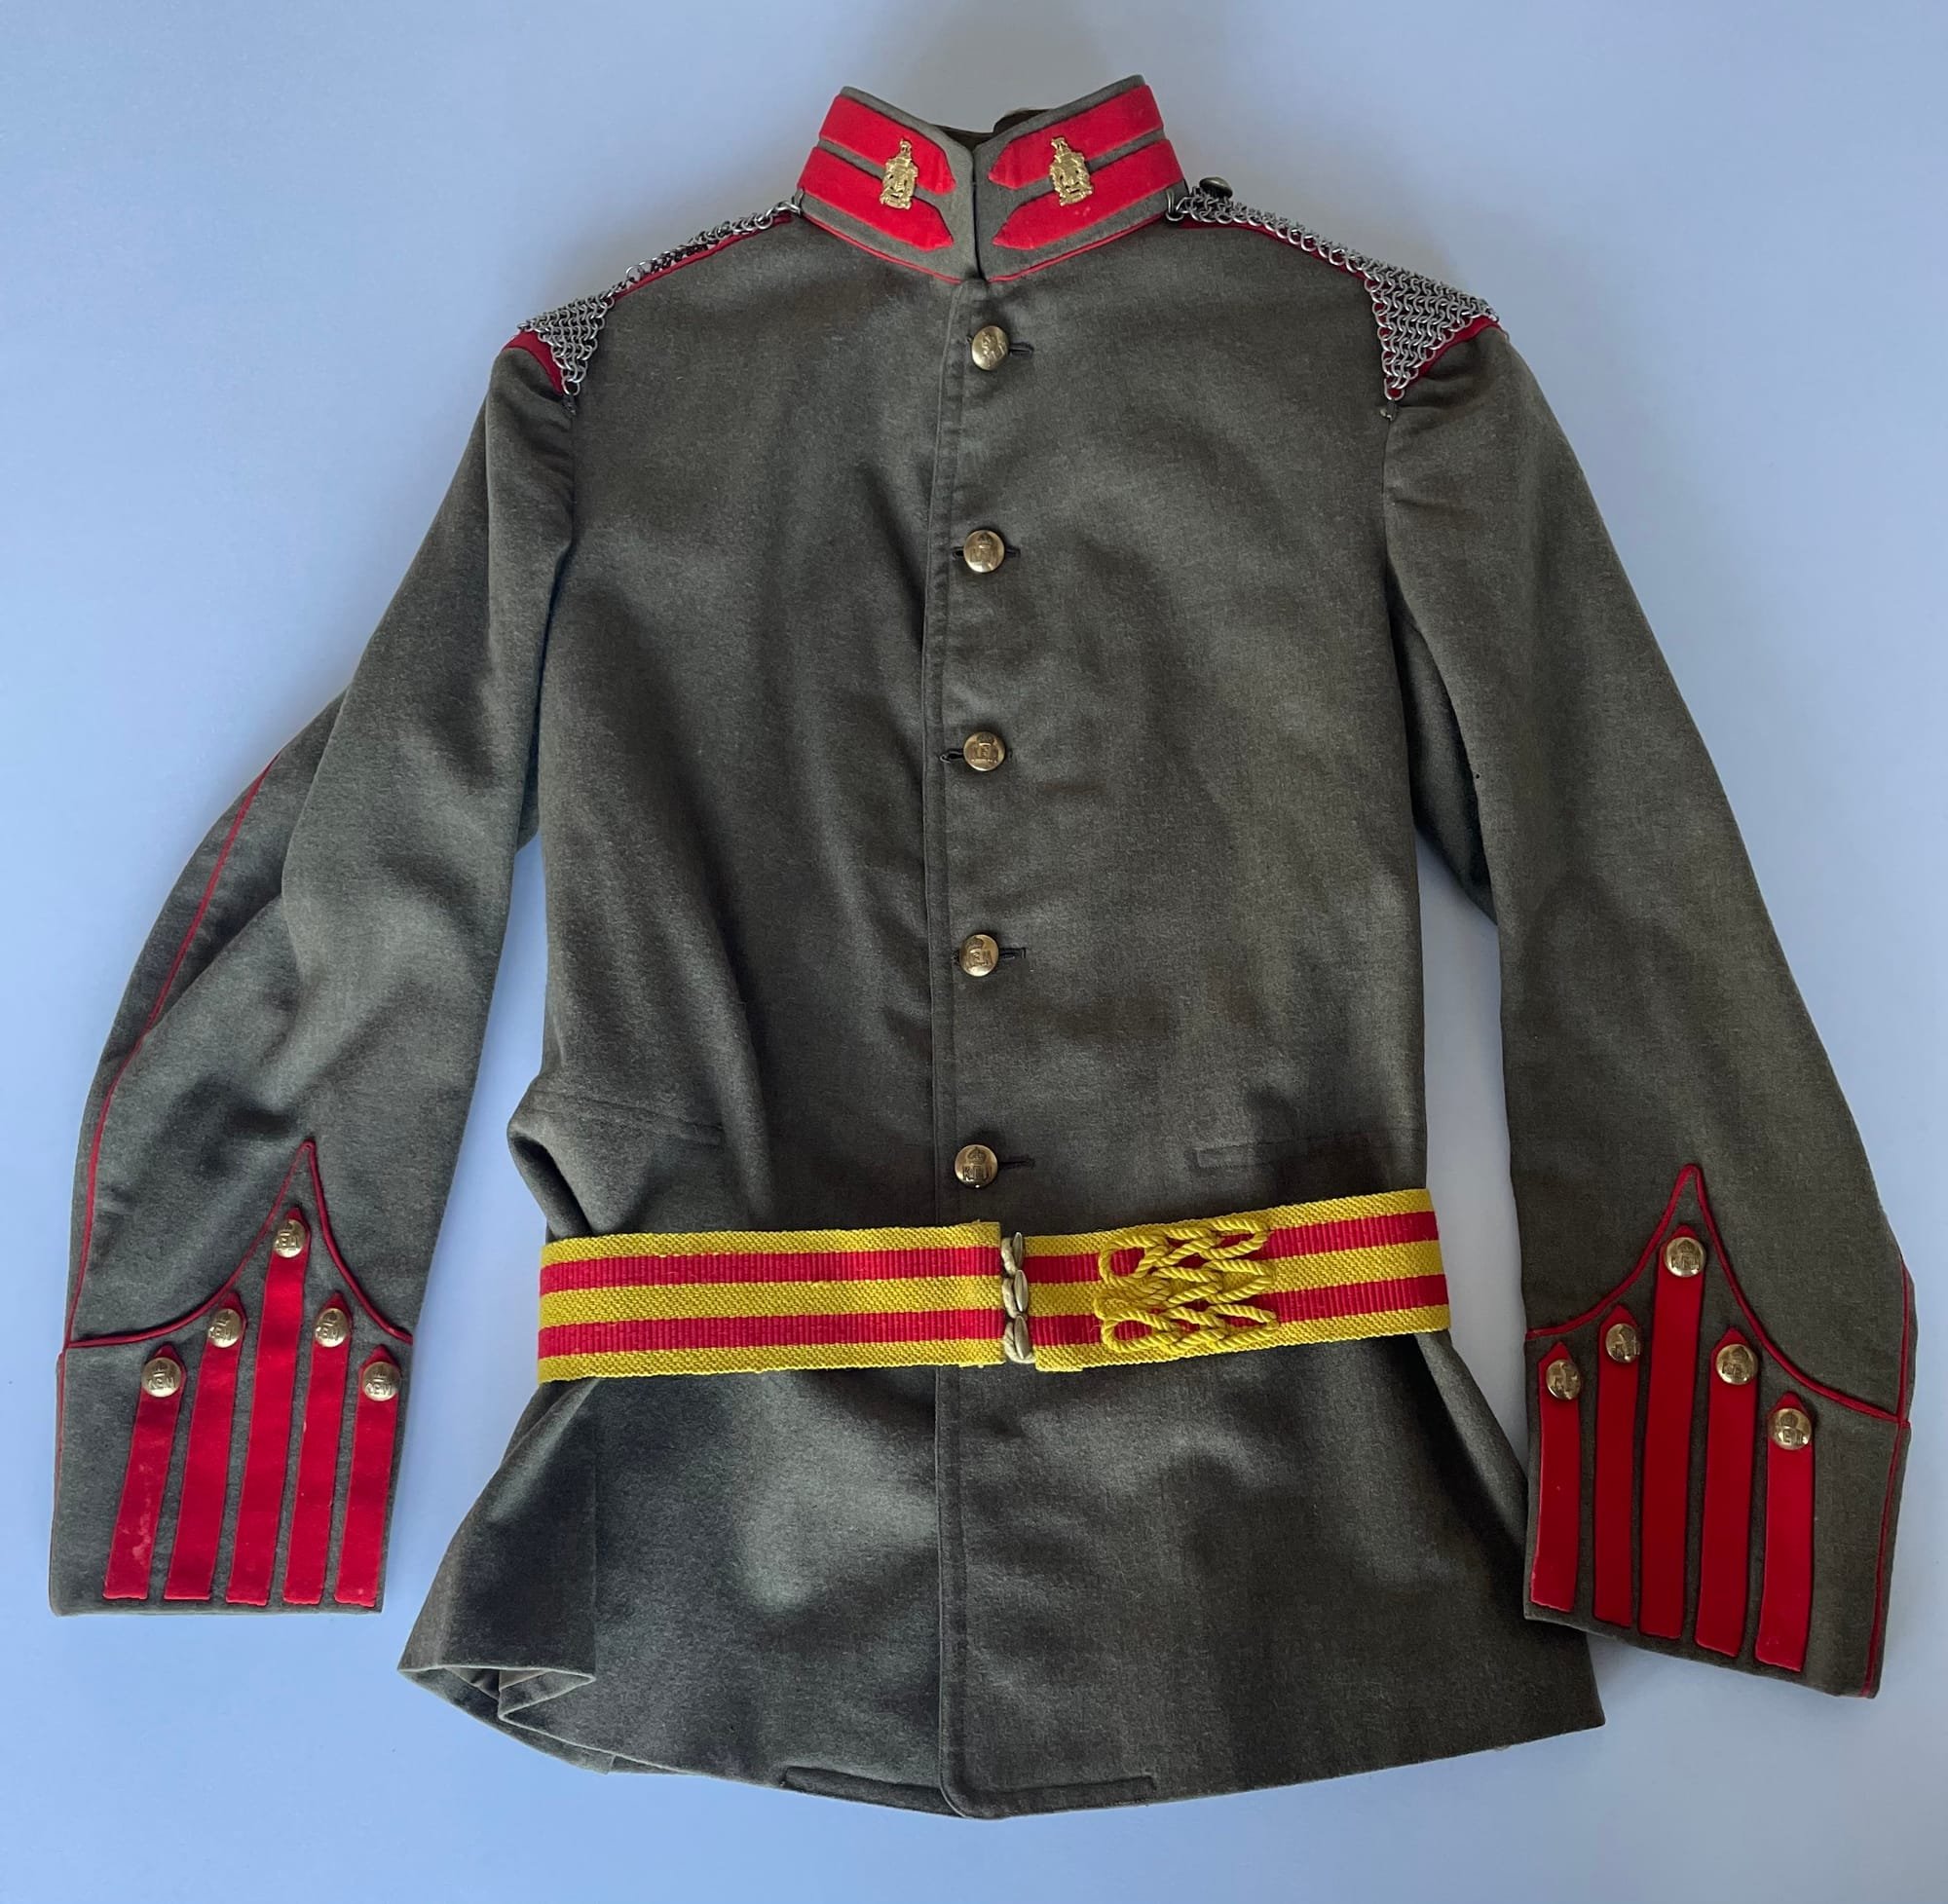 KEH Officer's Full Dress tunic 1913-14 missing shoulder titles and rank pips